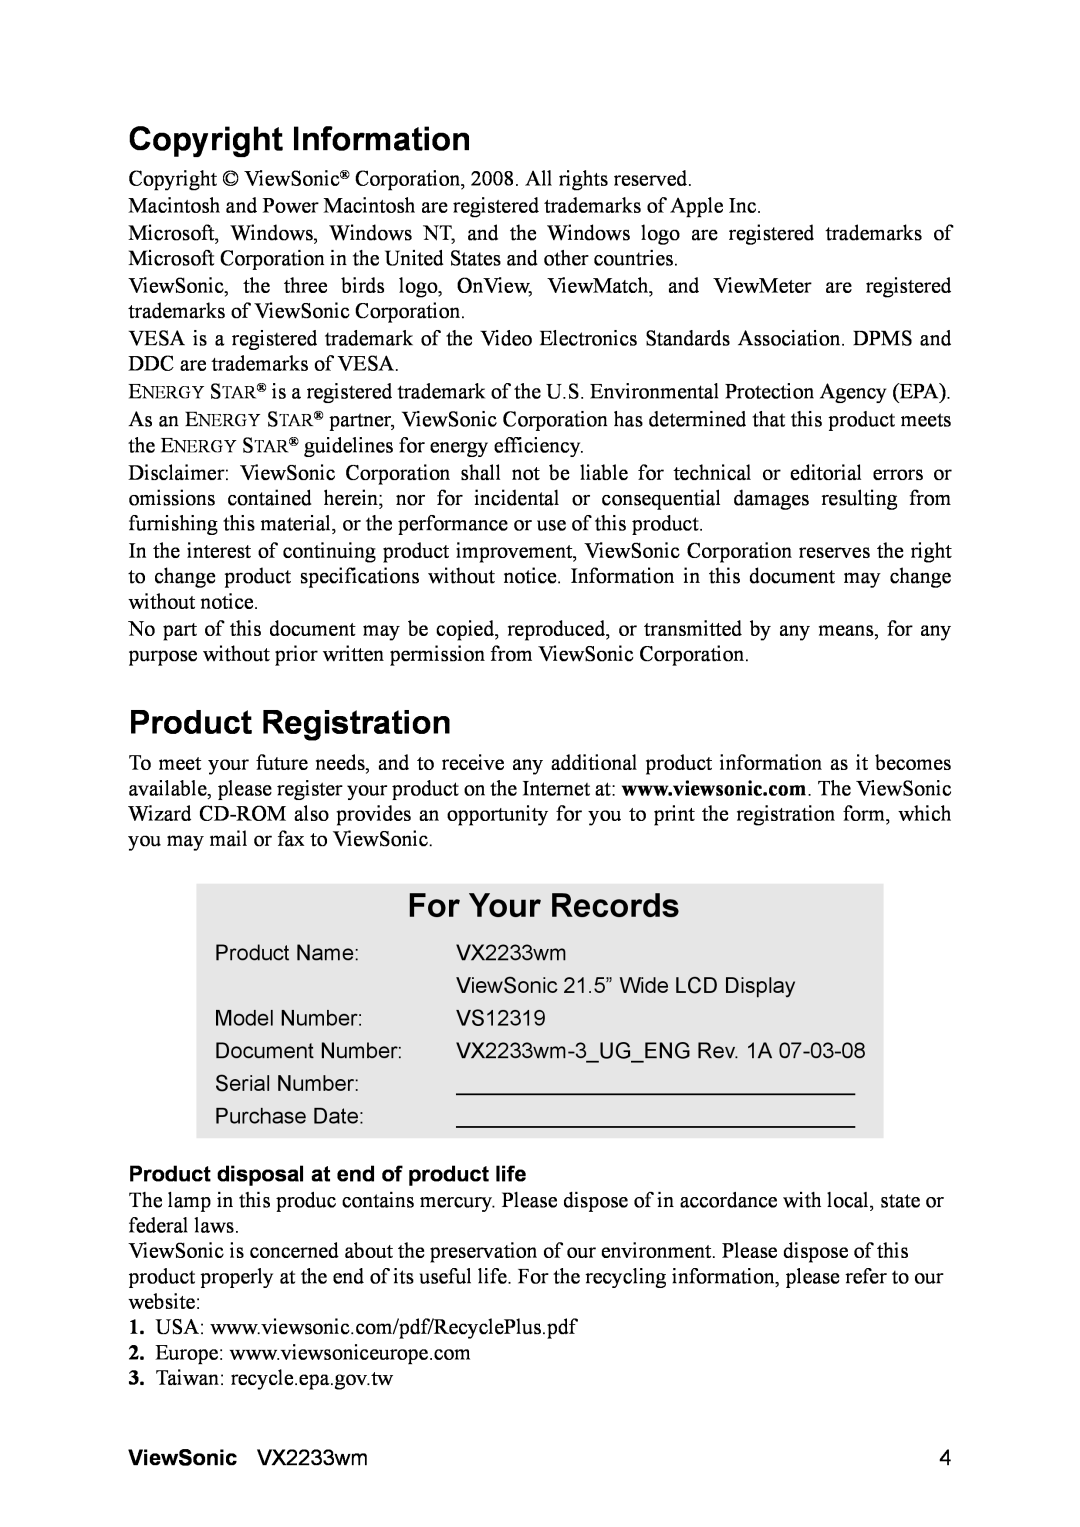 ViewSonic VS12319 Copyright Information, Product Registration, For Your Records, Product disposal at end of product life 